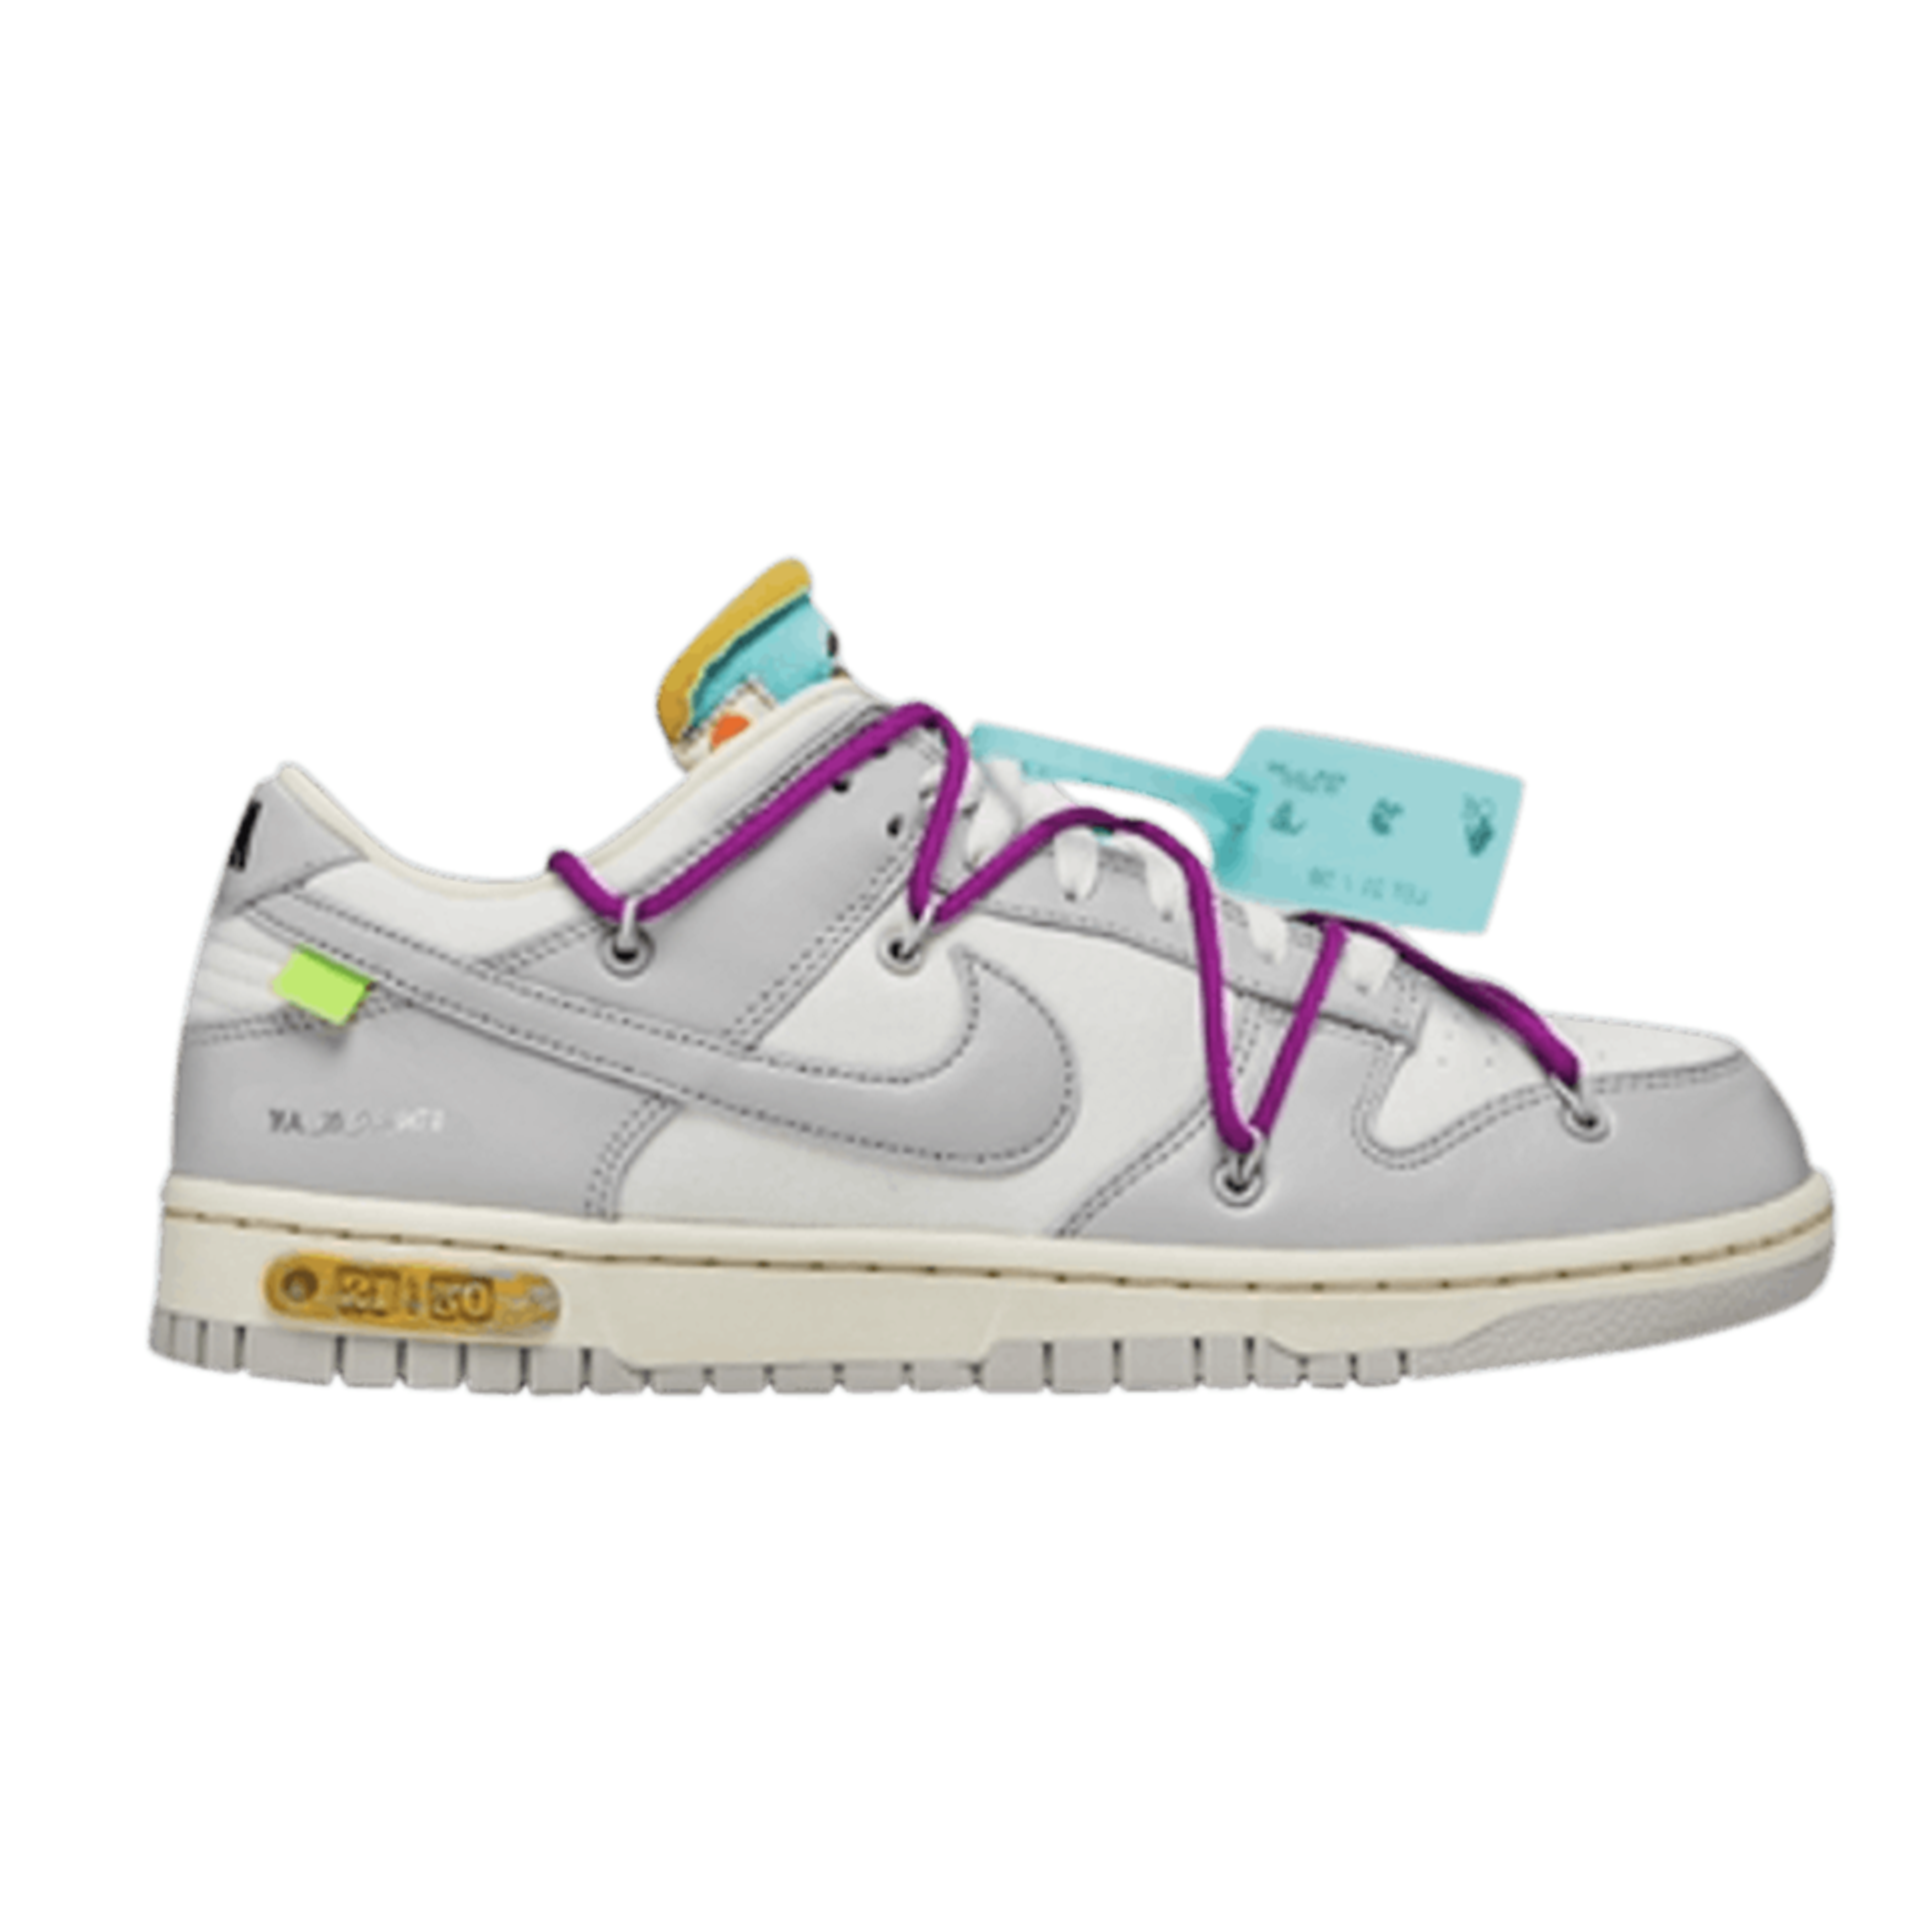 Nike Off-White x Dunk Low 'Dear Summer - Lot 21 of 50'